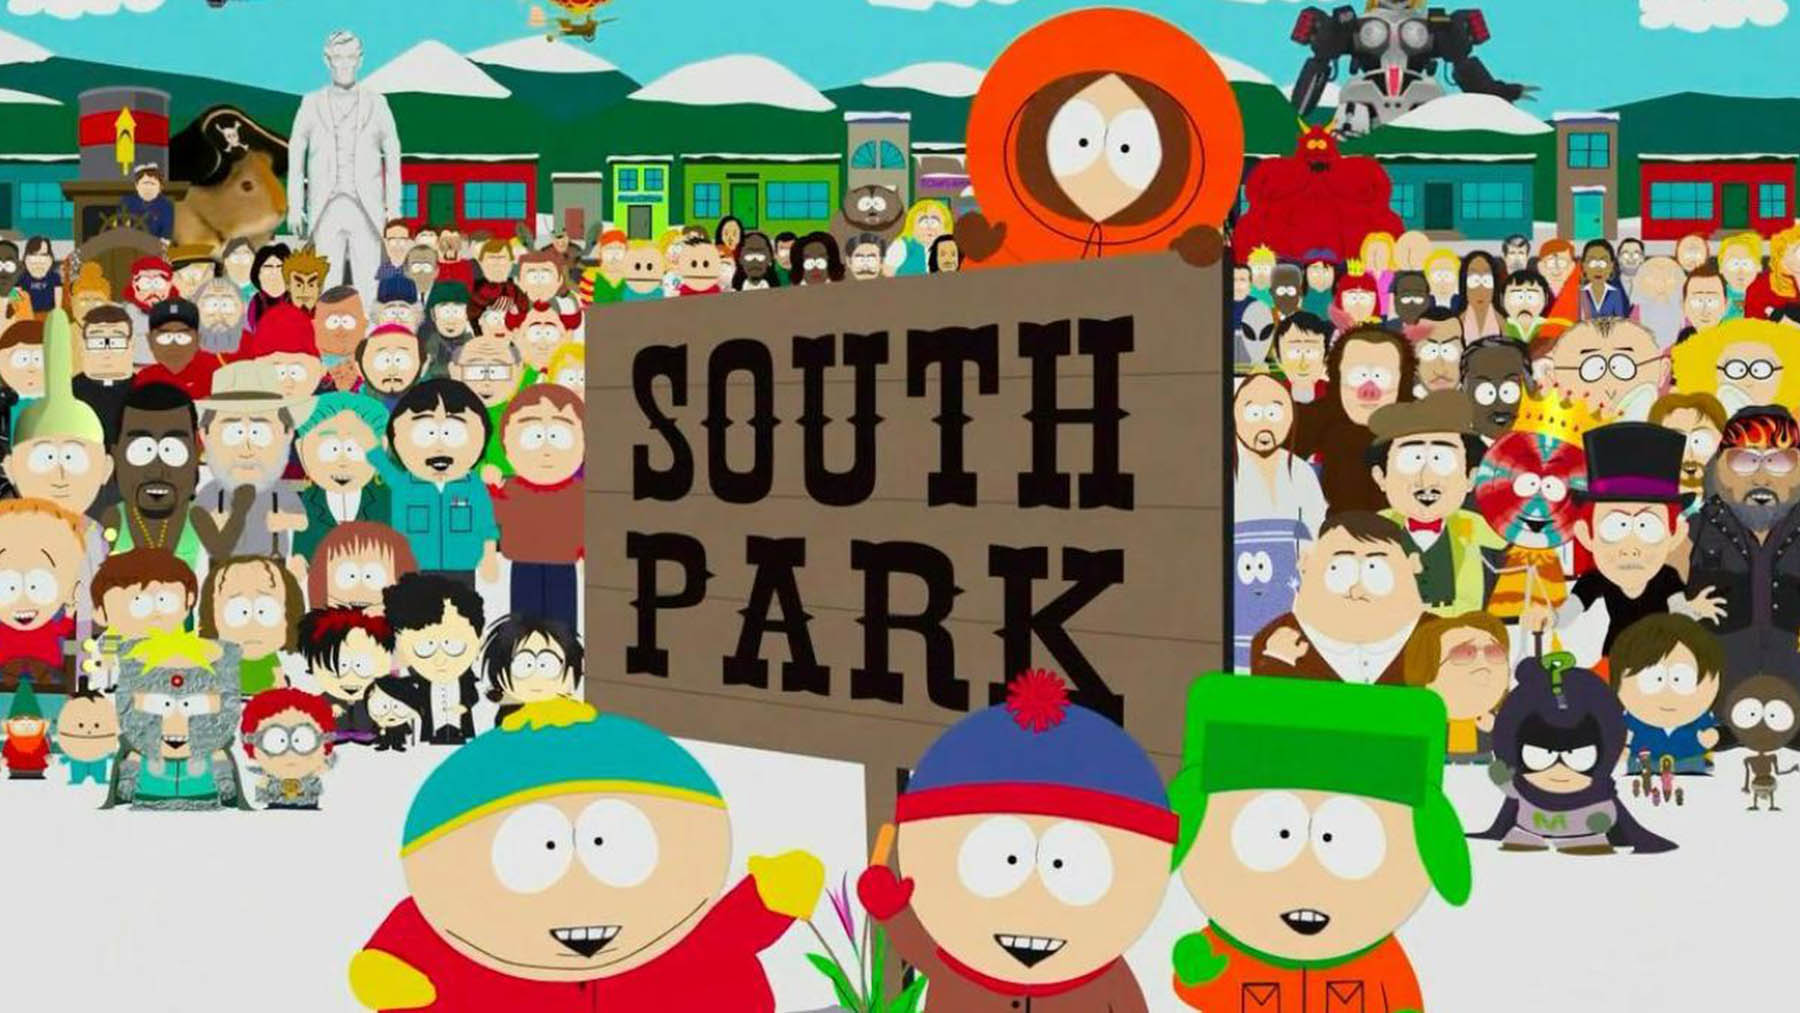 «South Park» (Comedy Central/Paramount)